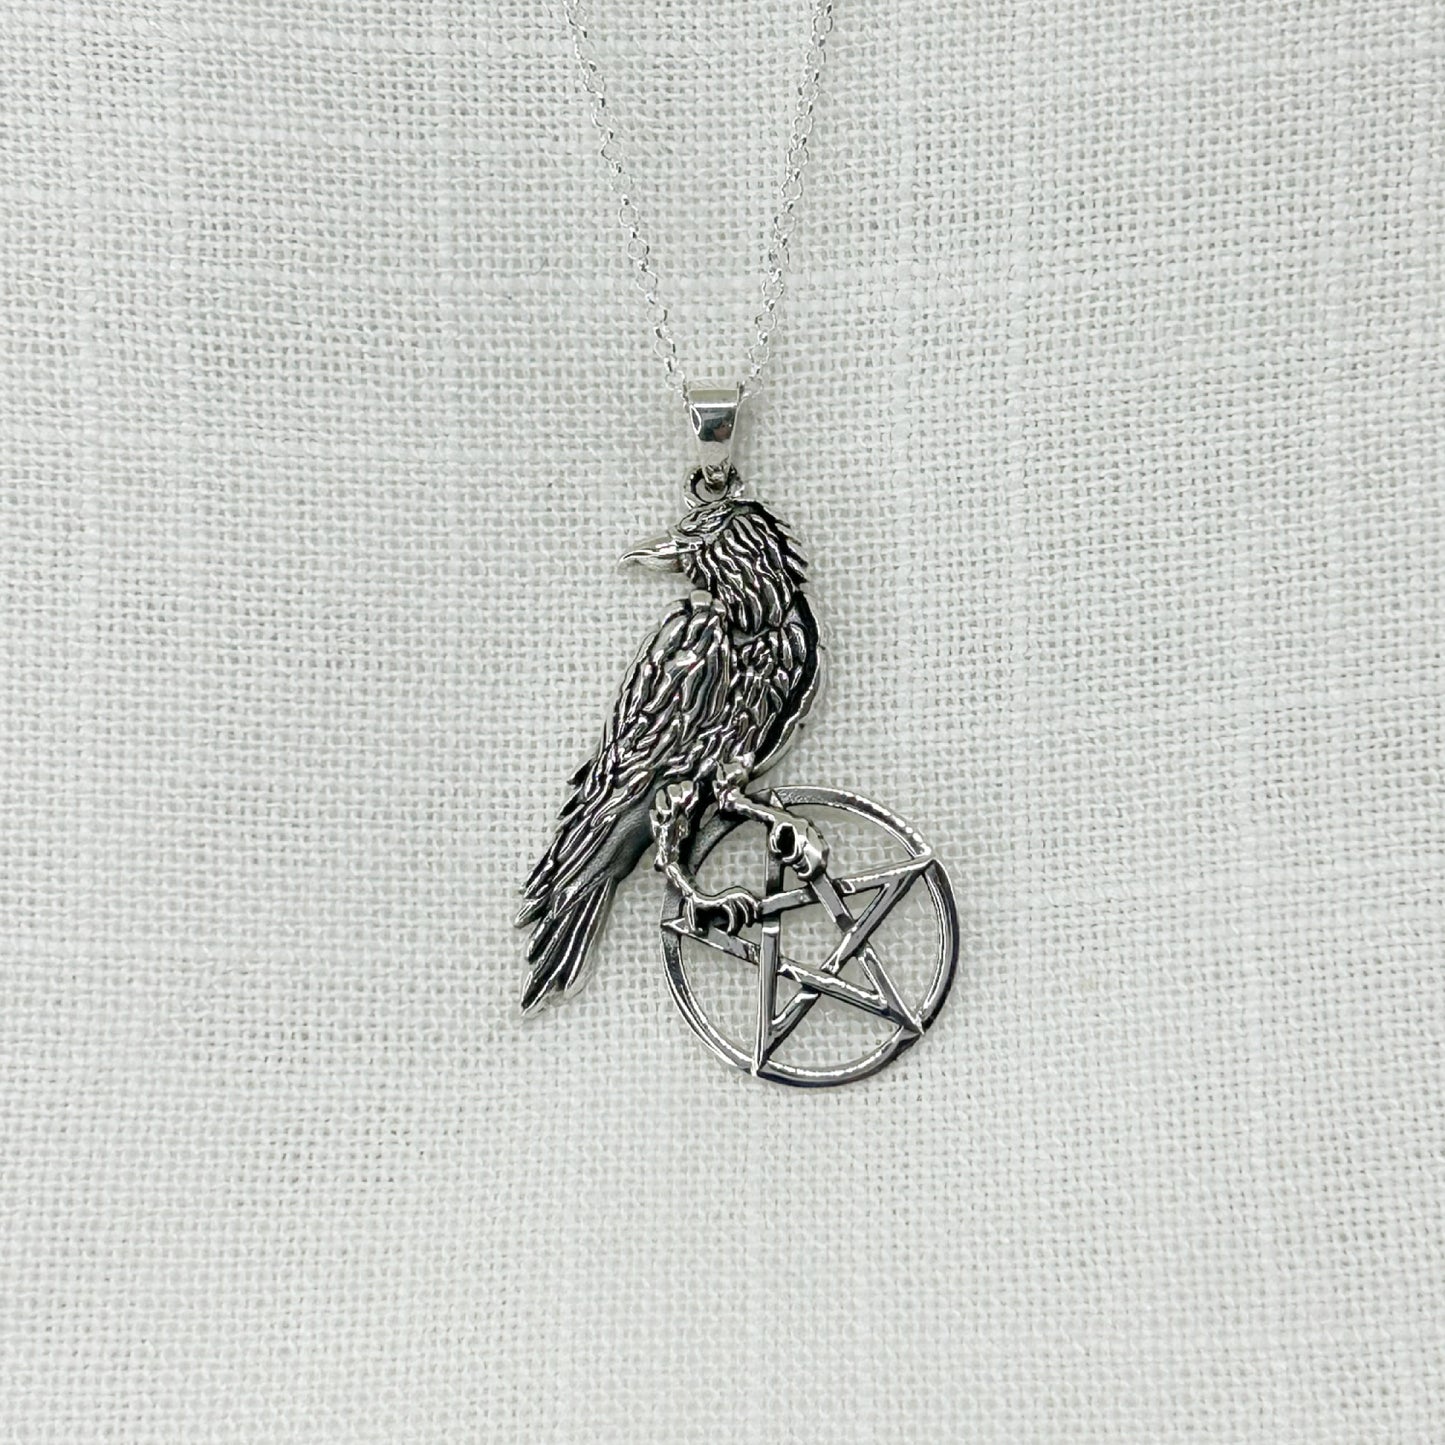 This .925 silver raven clutches on to his pentacle as he looks around him. Including the bale the pendant is approx 4cm long and comes with a 20" sterling silver chain and is gift boxed.